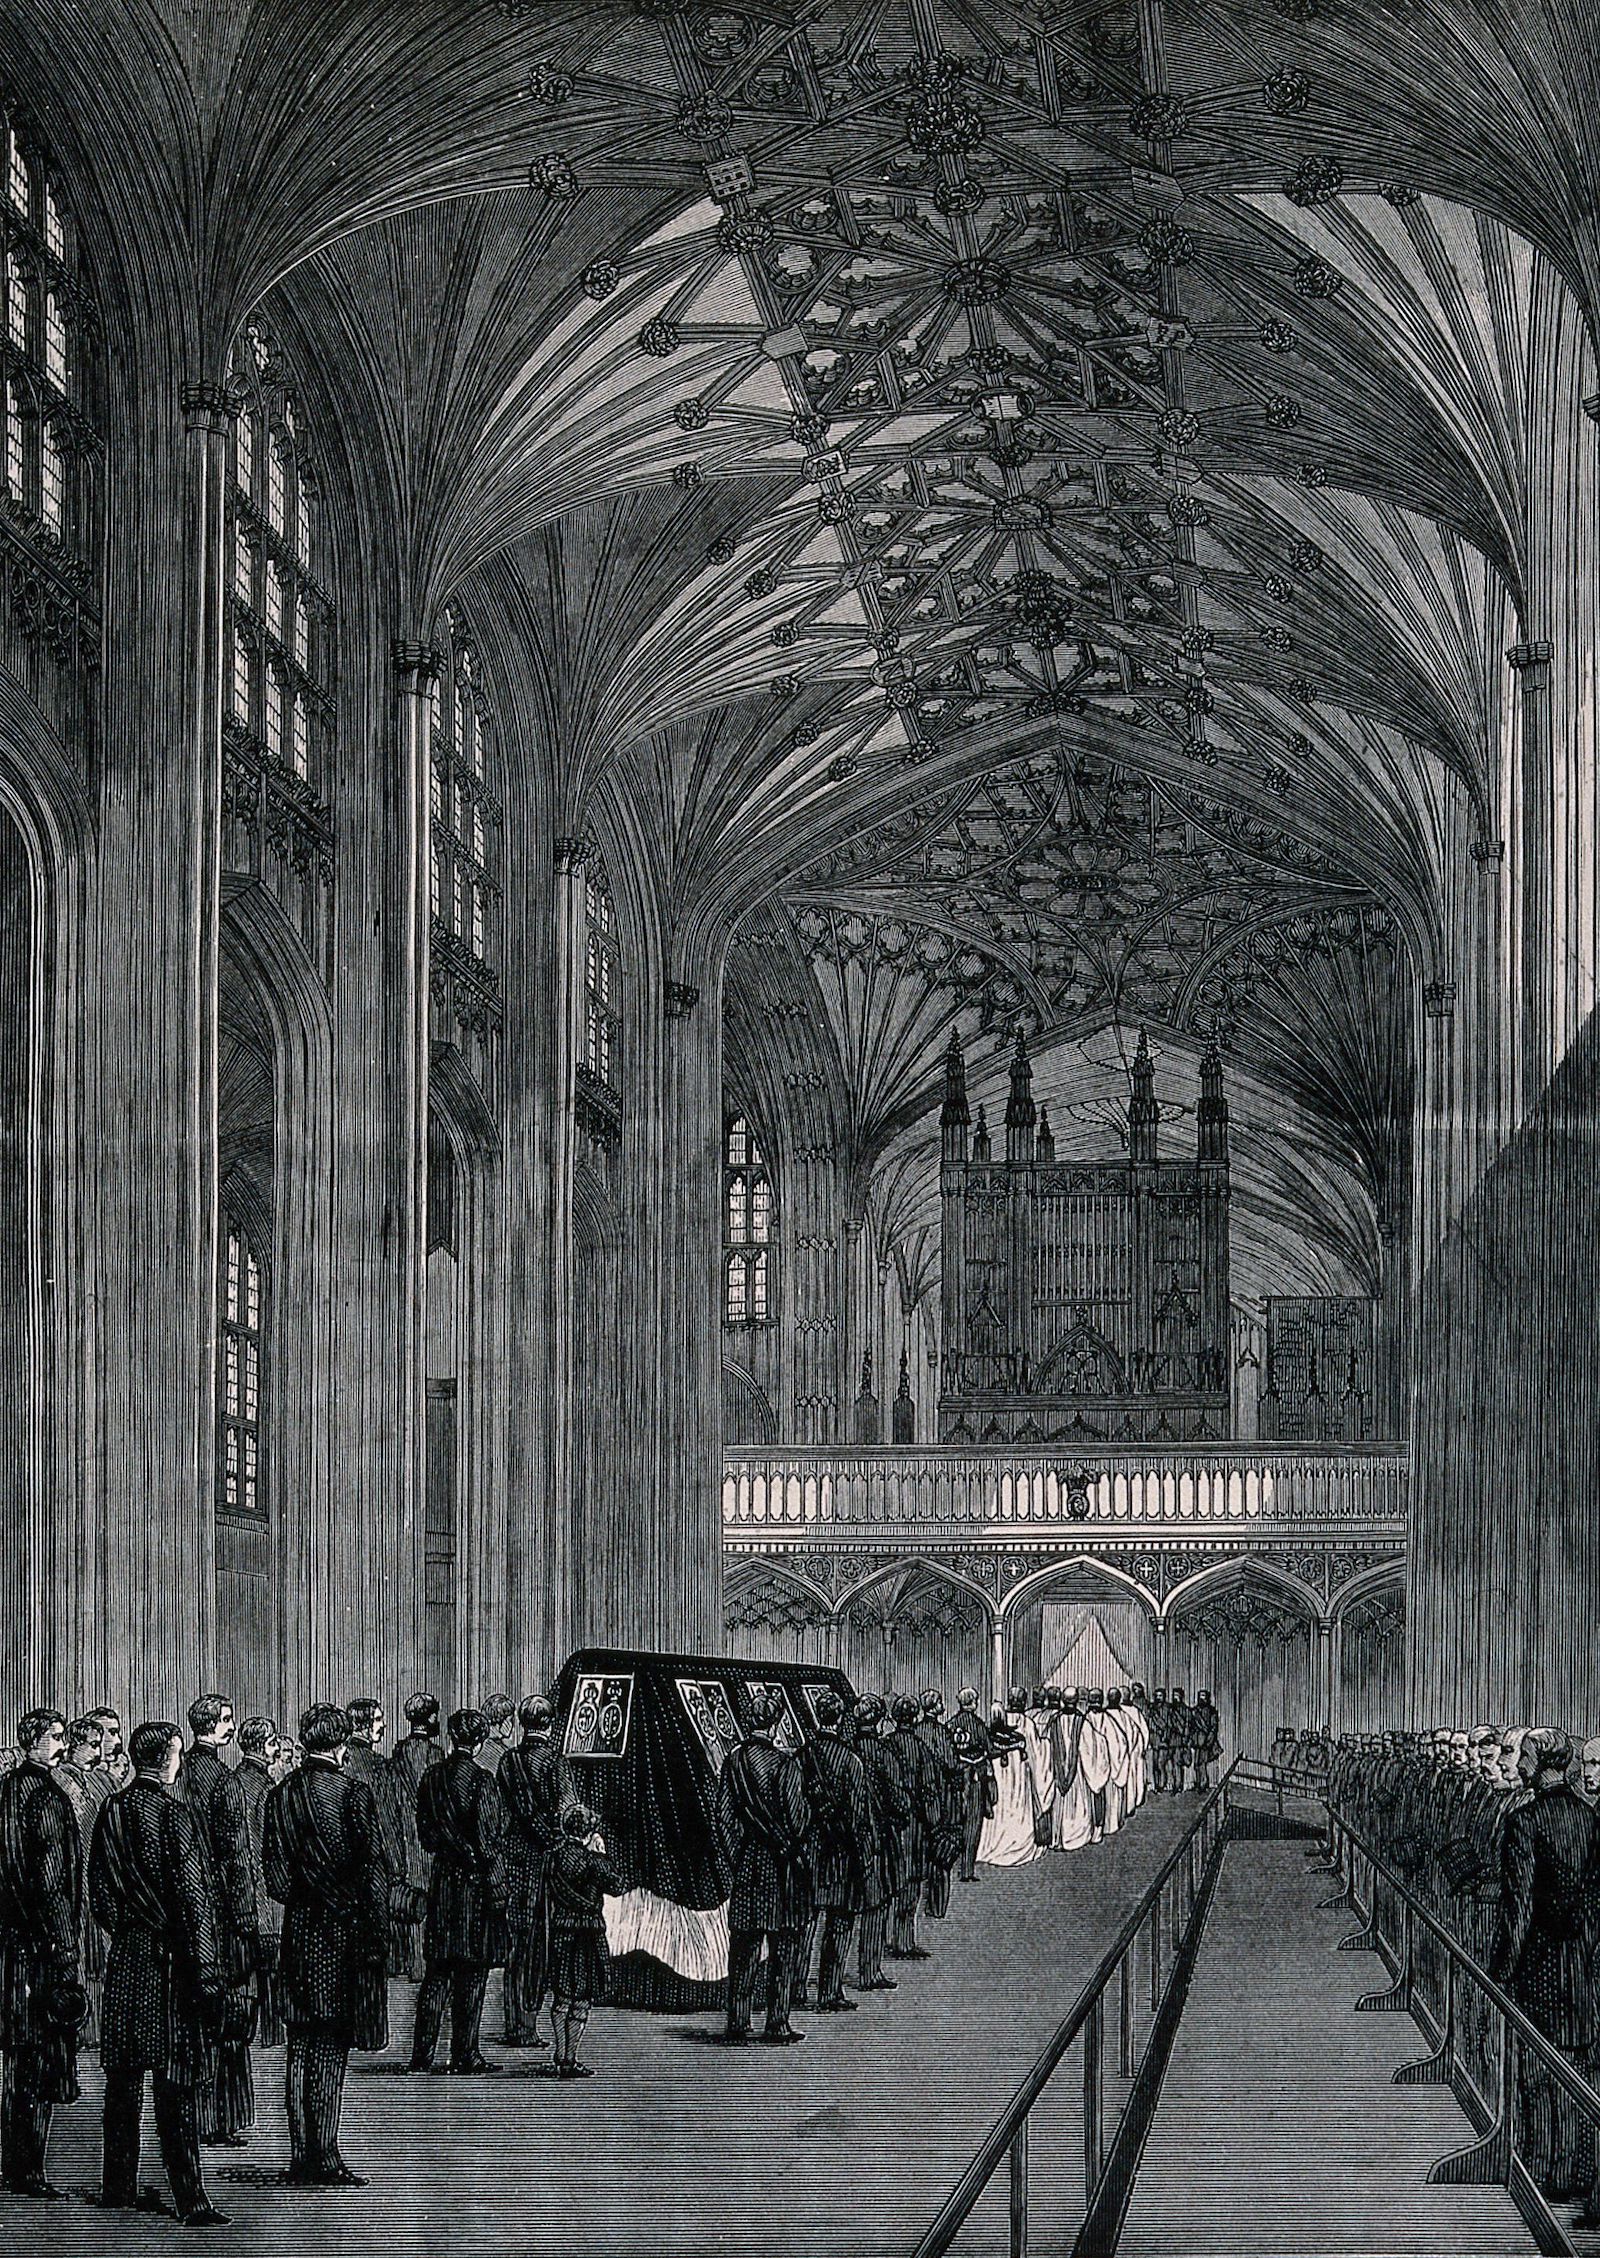 The funeral of Prince Albert at Windsor, c. 1861. Wellcome Collection. Public Domain.